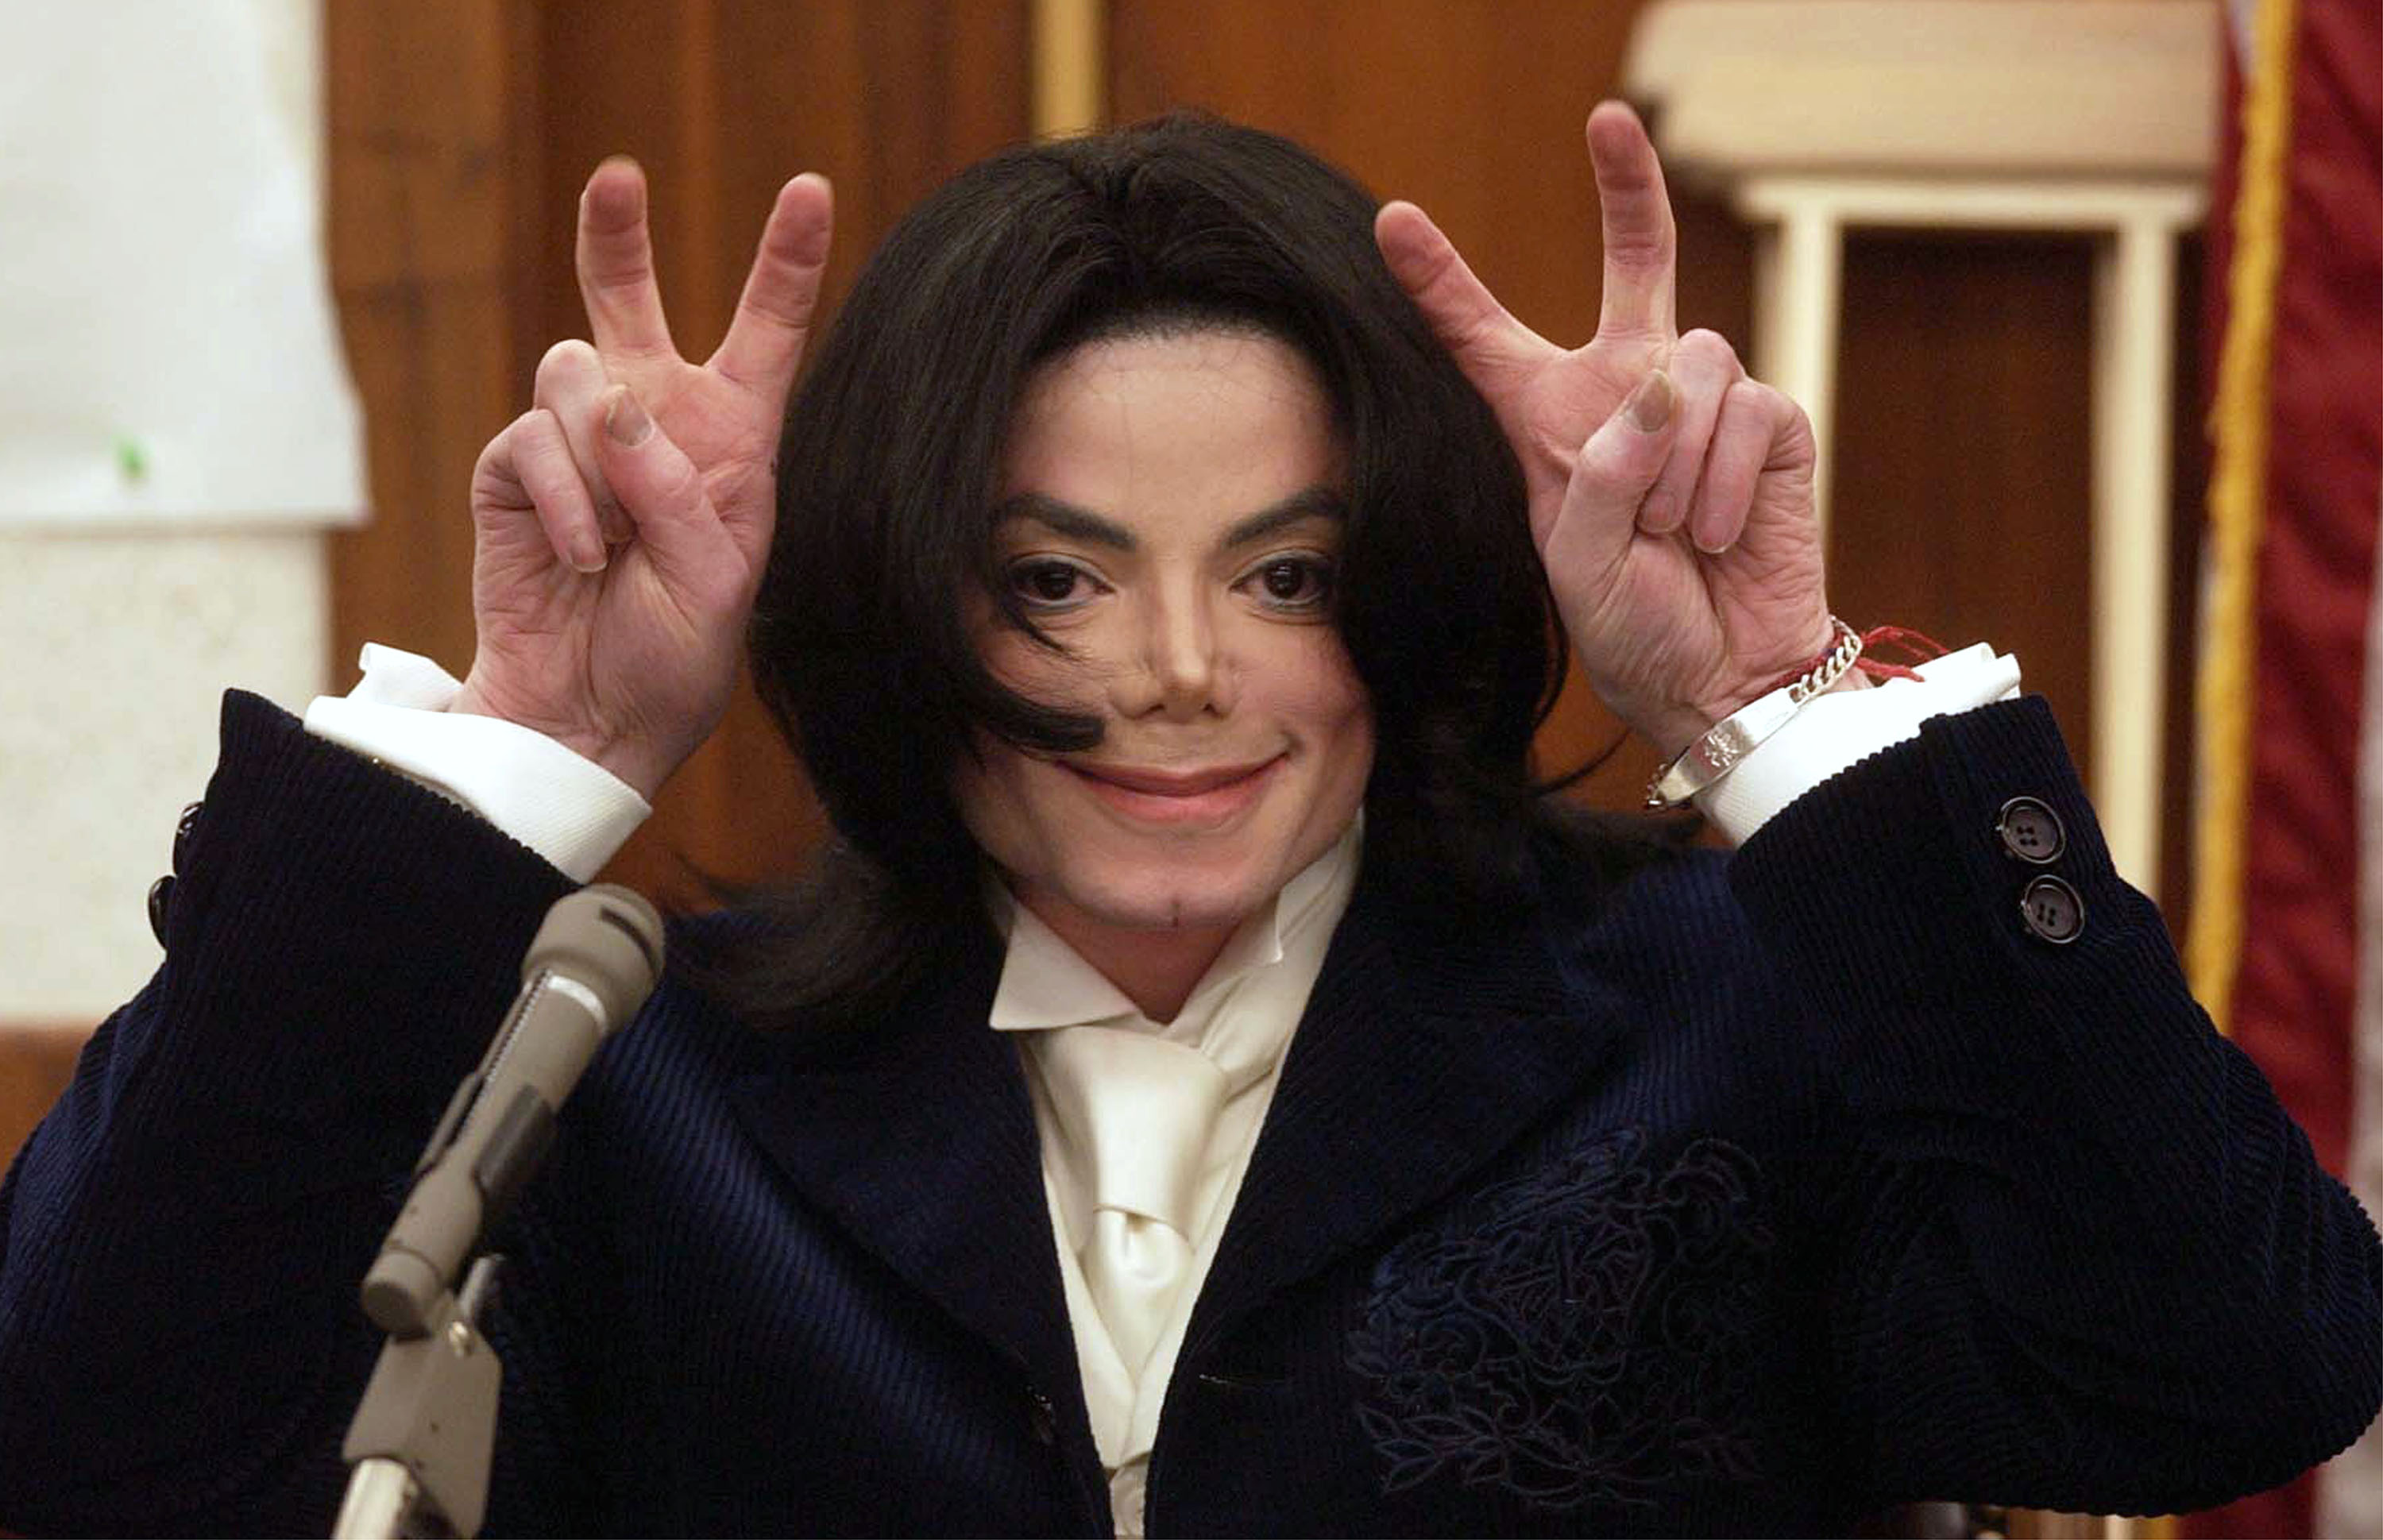 Michael Jackson during his civil trial in Santa Maria, 2002 | Source: Getty Images